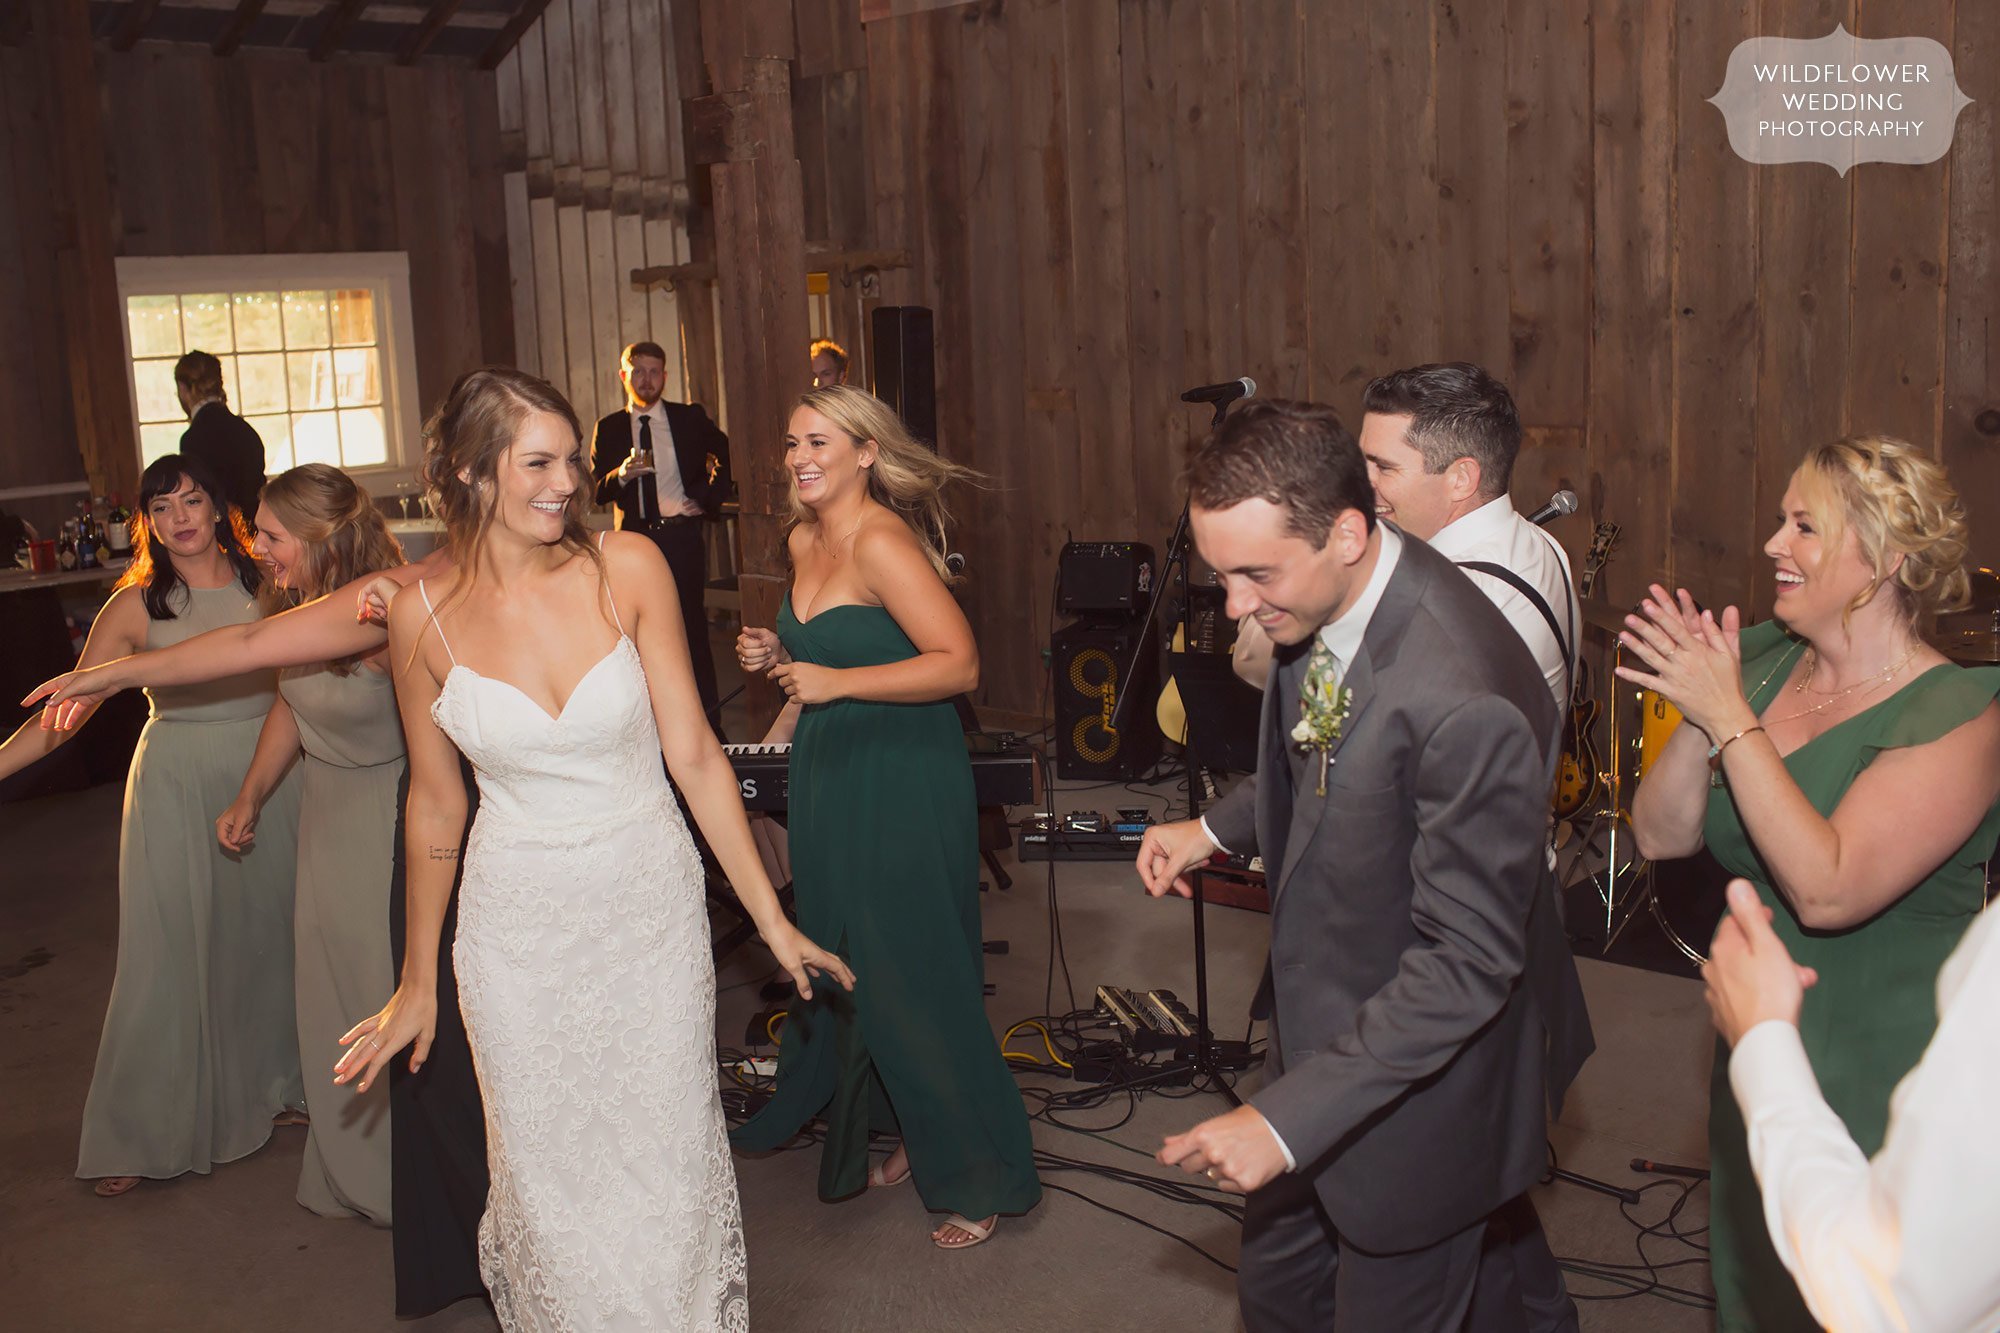 The bride and groom perform a choreographed dance with their wedding party during introductions at the Weston Red Barn.